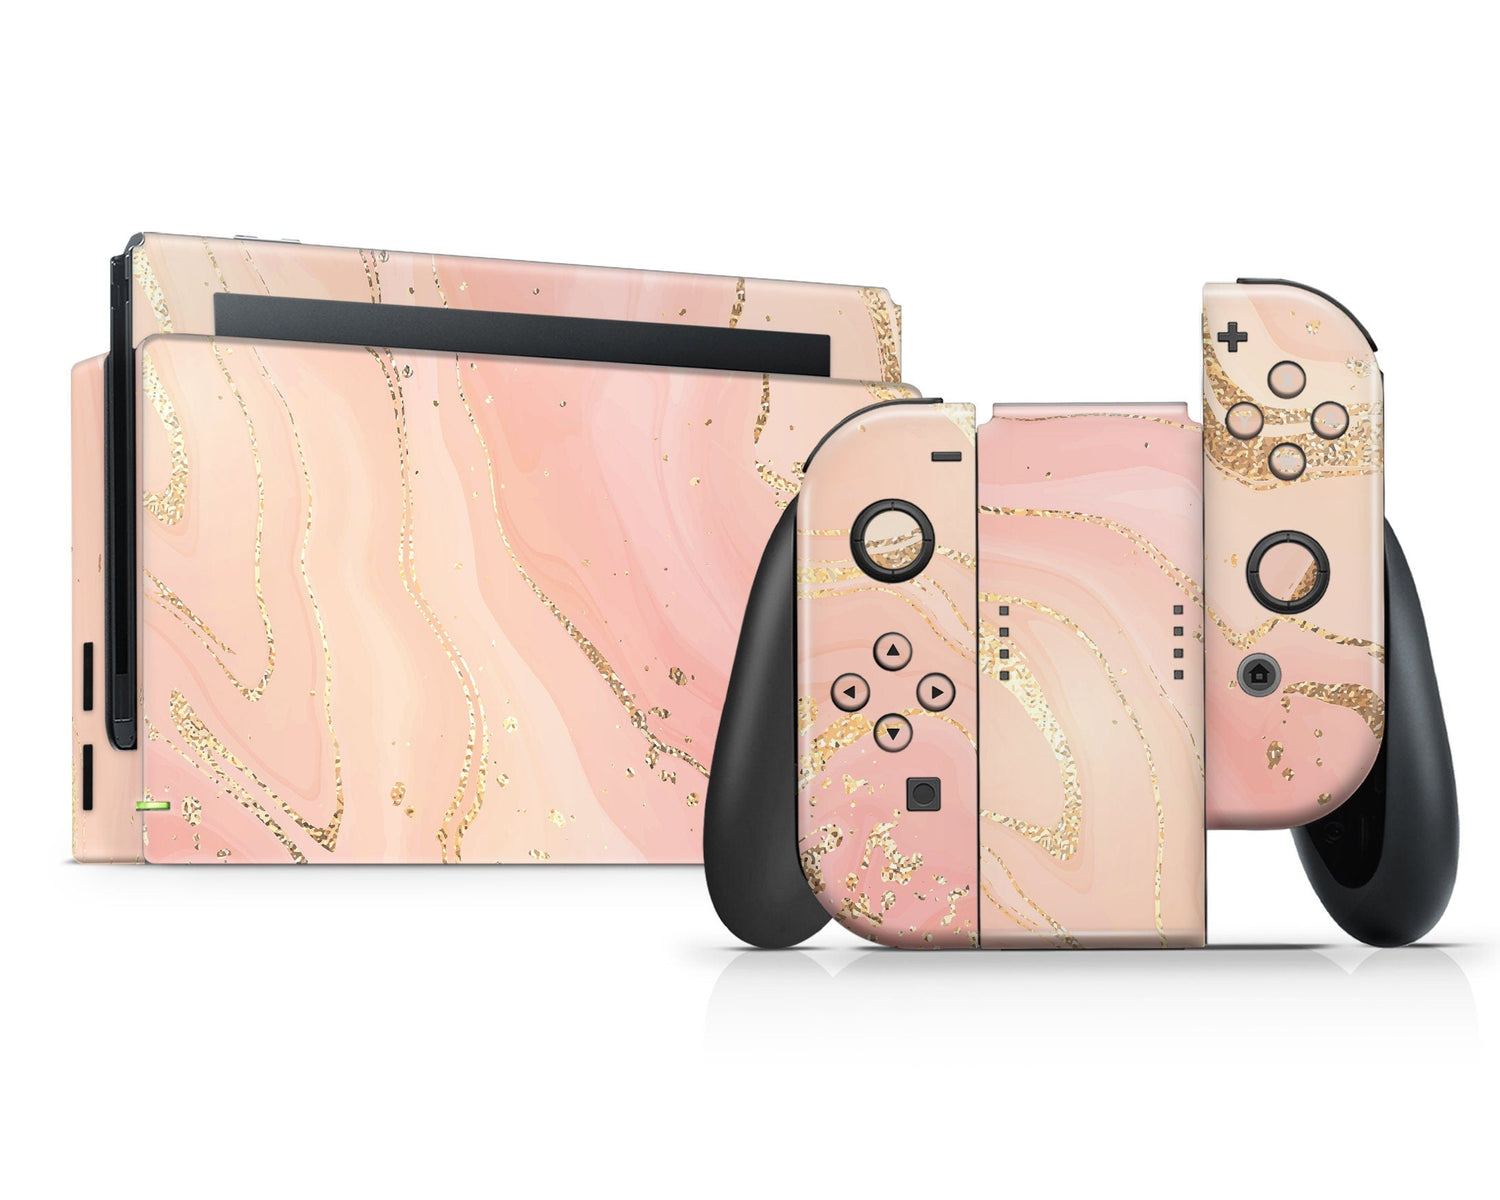 Lux Skins Nintendo Switch Ethereal Peach Pink Marble Full Set Skins - Pattern Marble Skin